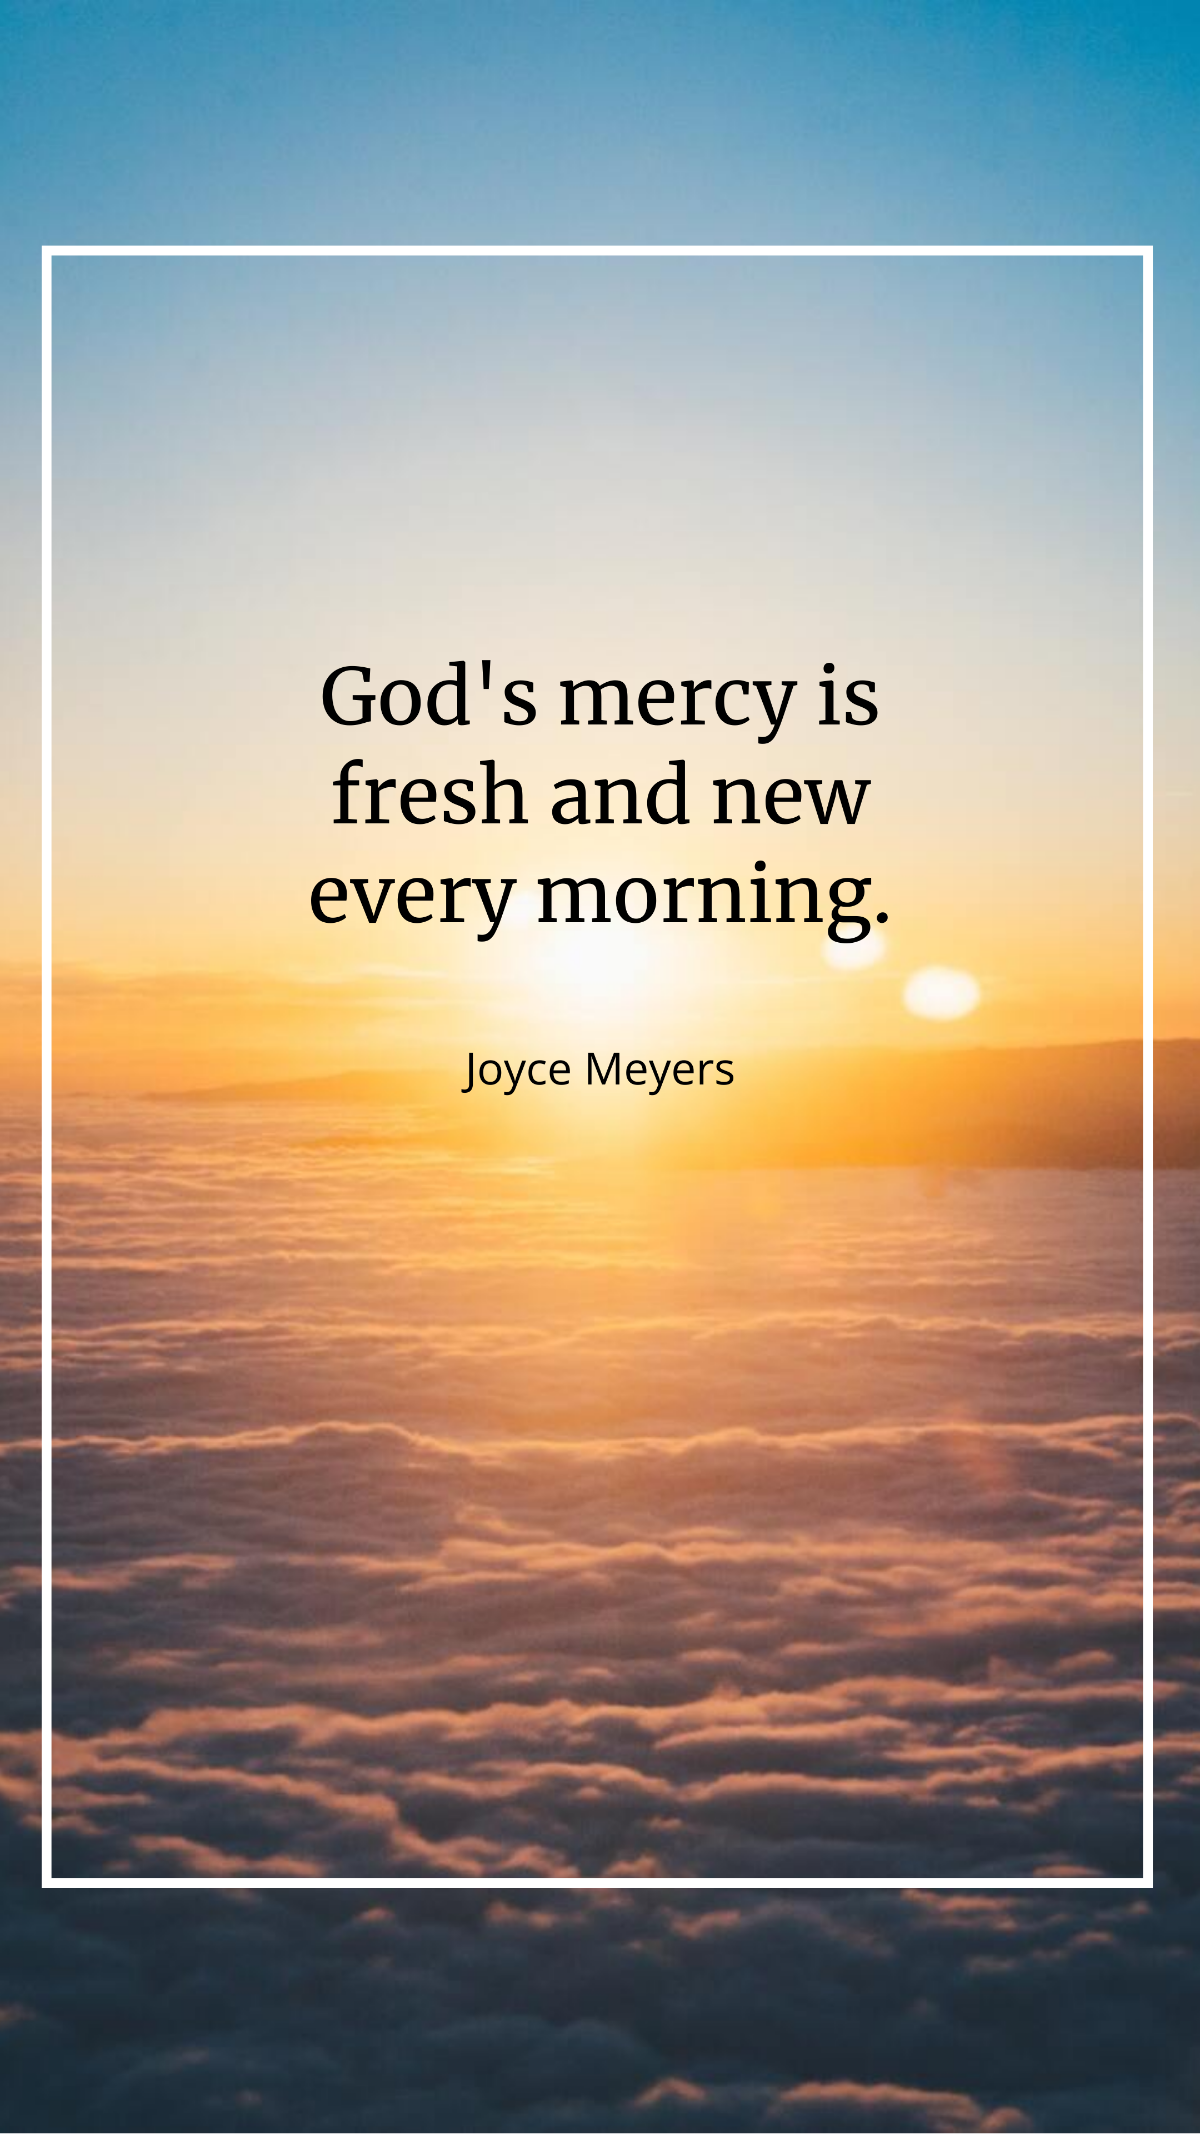 Joyce Meyers - God's mercy is fresh and new every morning. Template